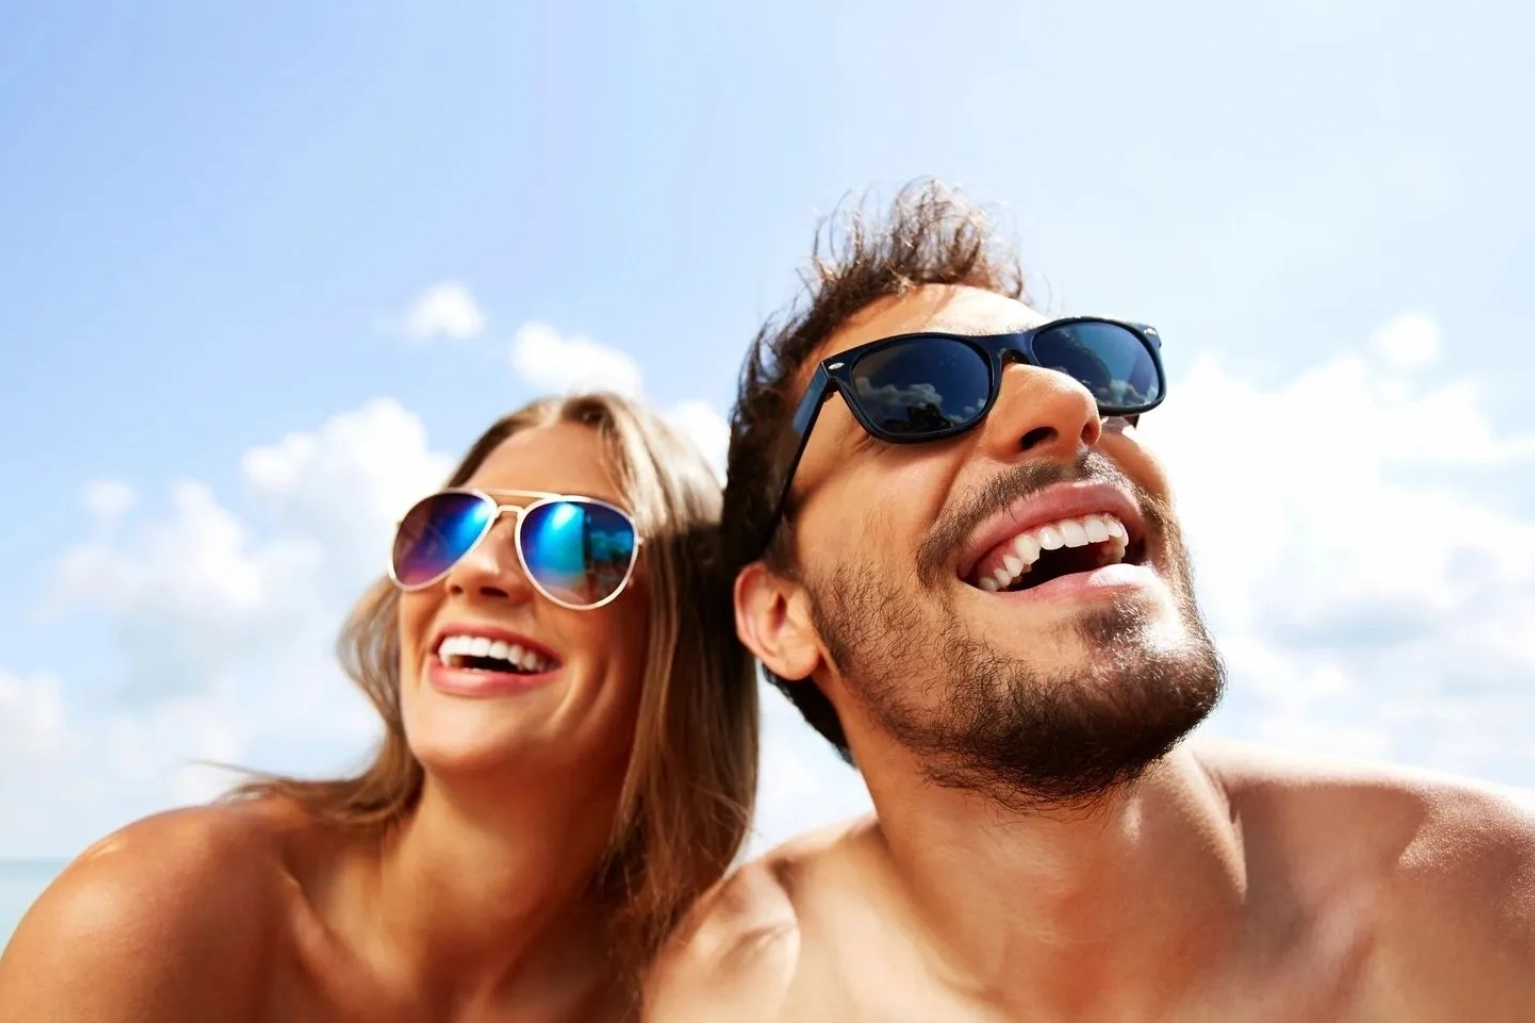 A joyful man and woman wearing sunglasses, smiling under a clear blue sky after their red light skin care session.